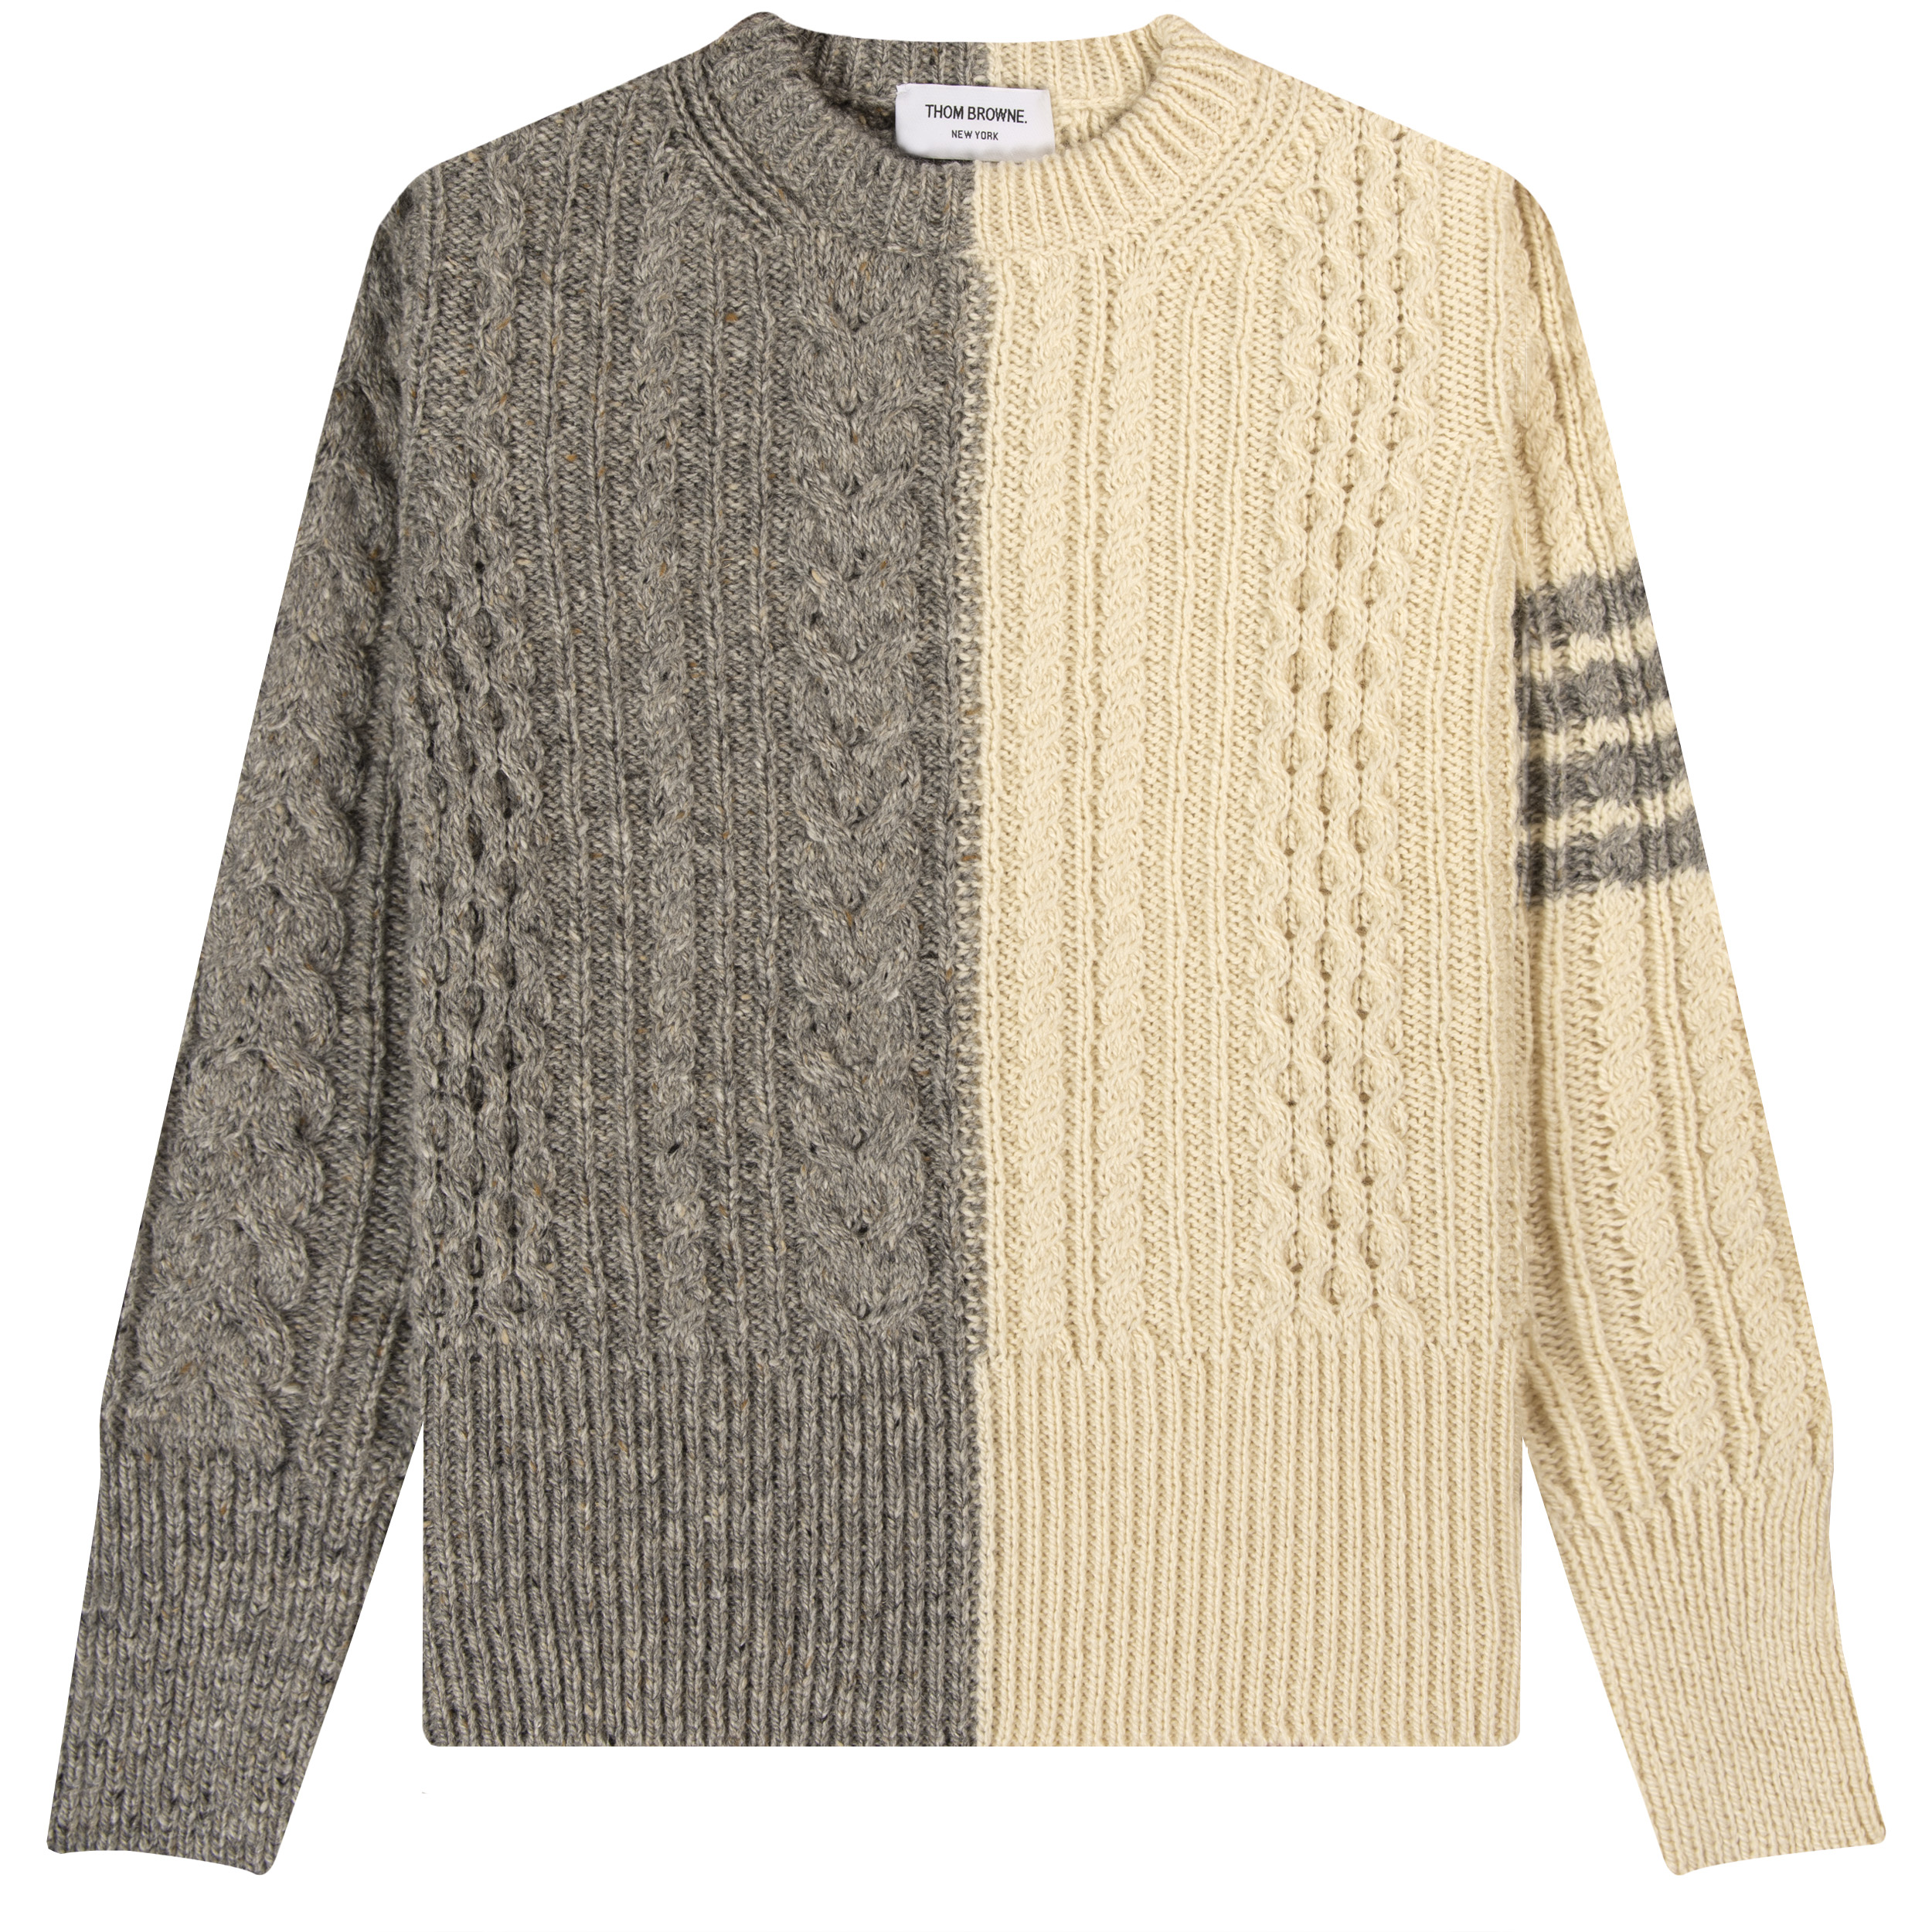 Thom Browne Fun-Mix Aran Cable Donegal 4-Bar Pullover Knit Light Grey/Cream